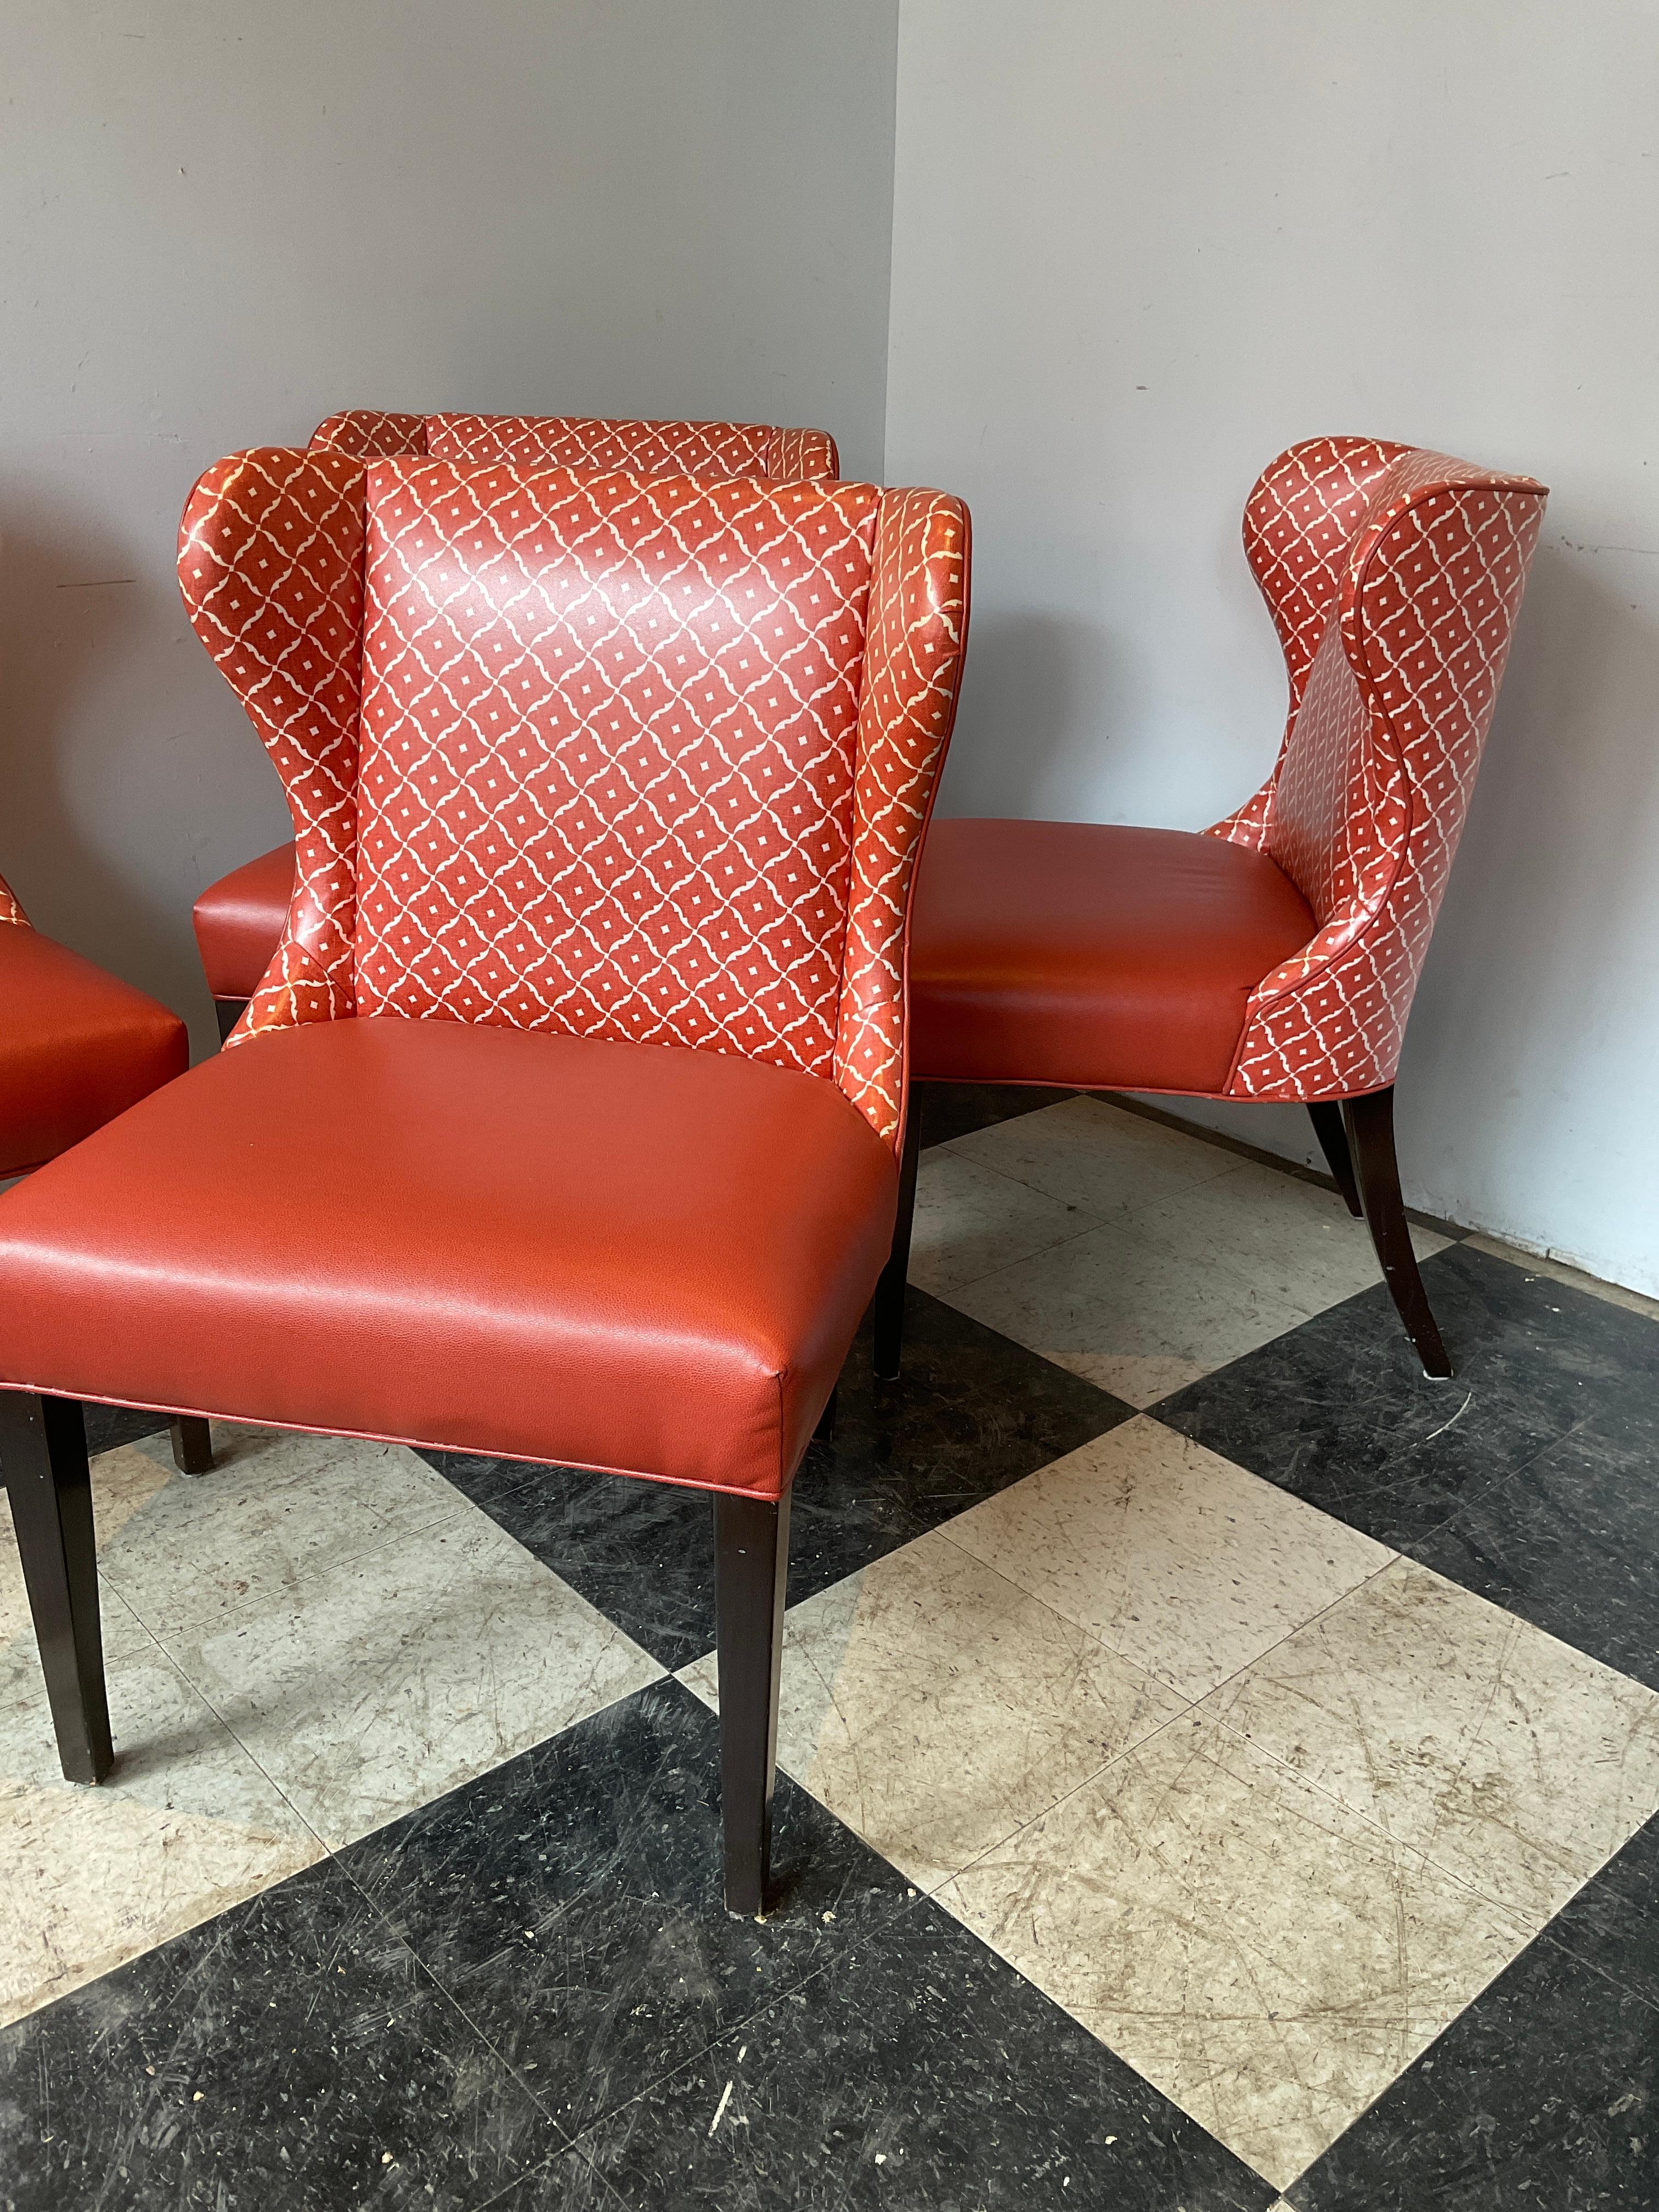 4 Orange modern wingback chairs. Faux leather seats are in good condition, rest of chair should be reupholstered.